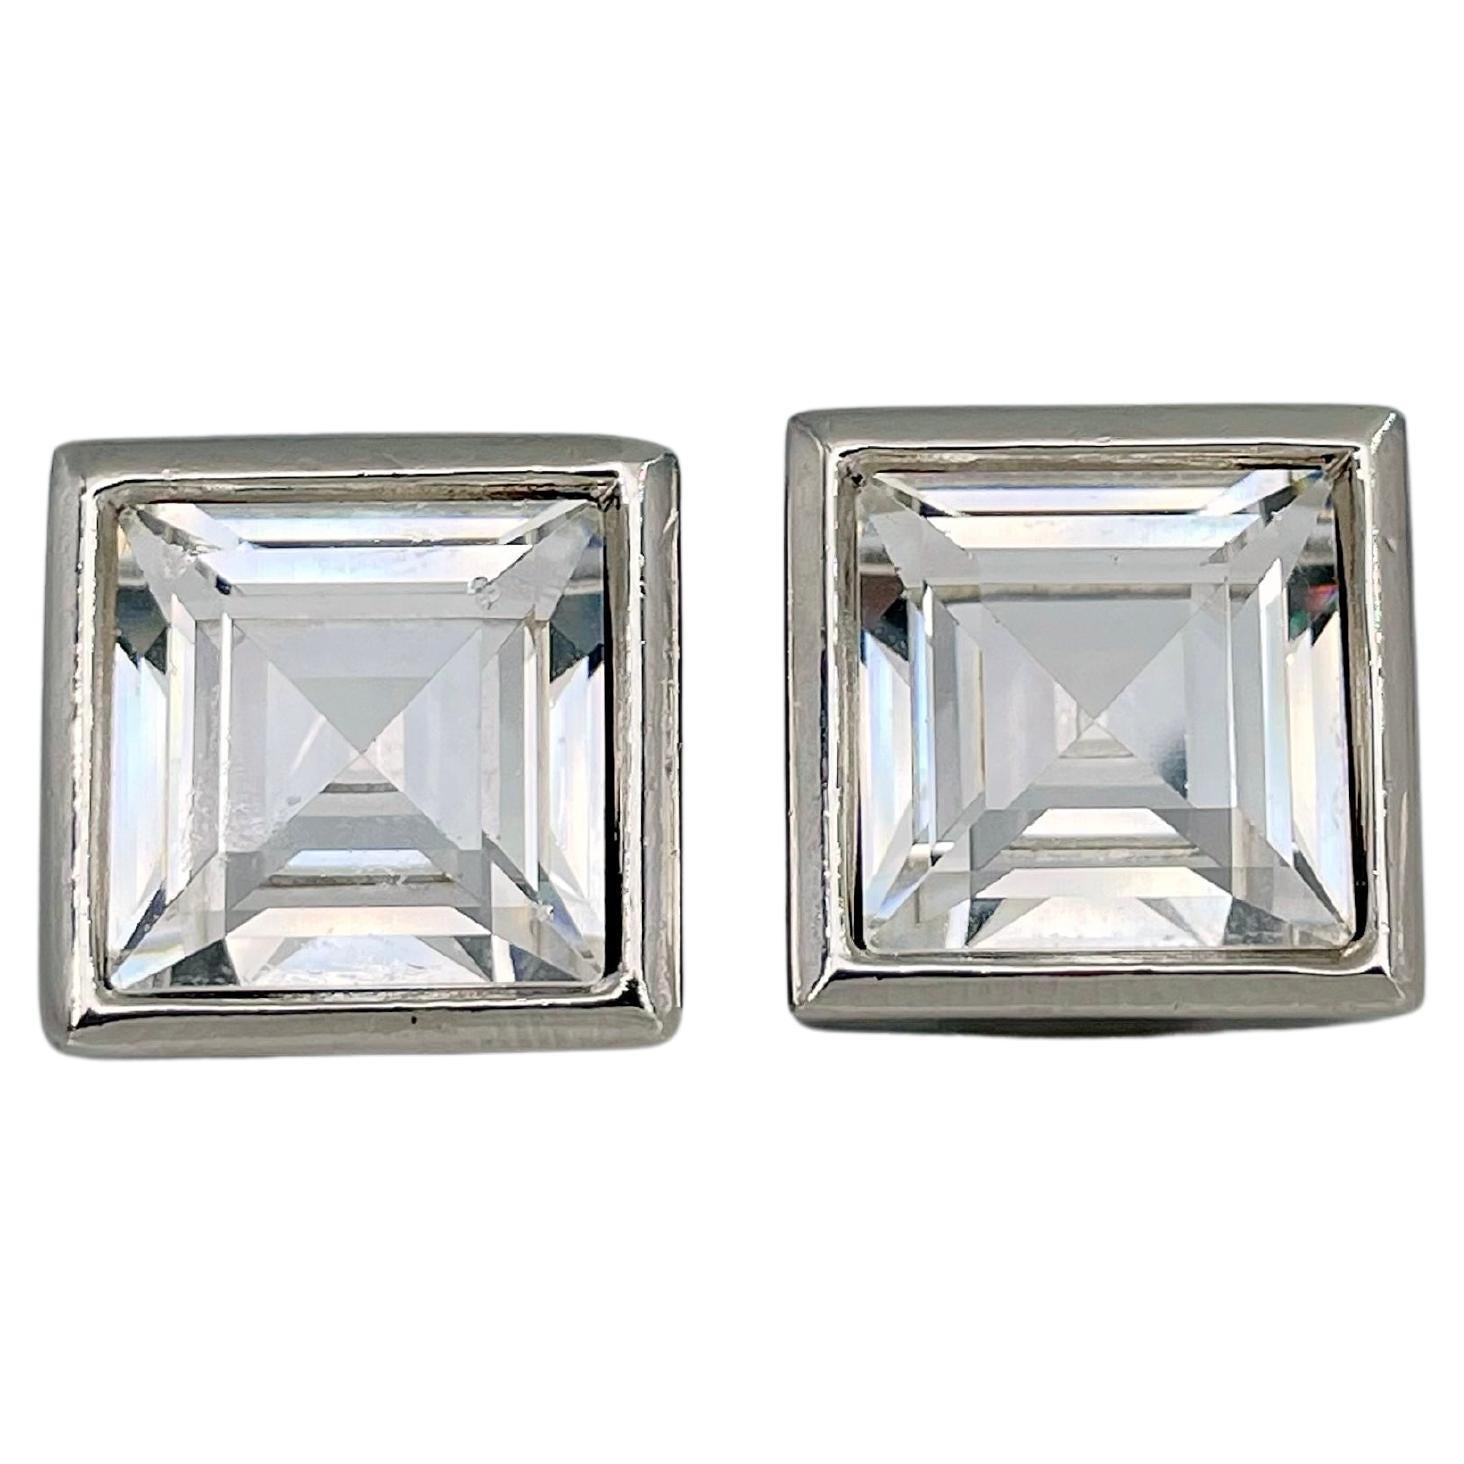 1990s Vintage Christian Dior Silver Tone Clear Crystal Square Clip On Earrings